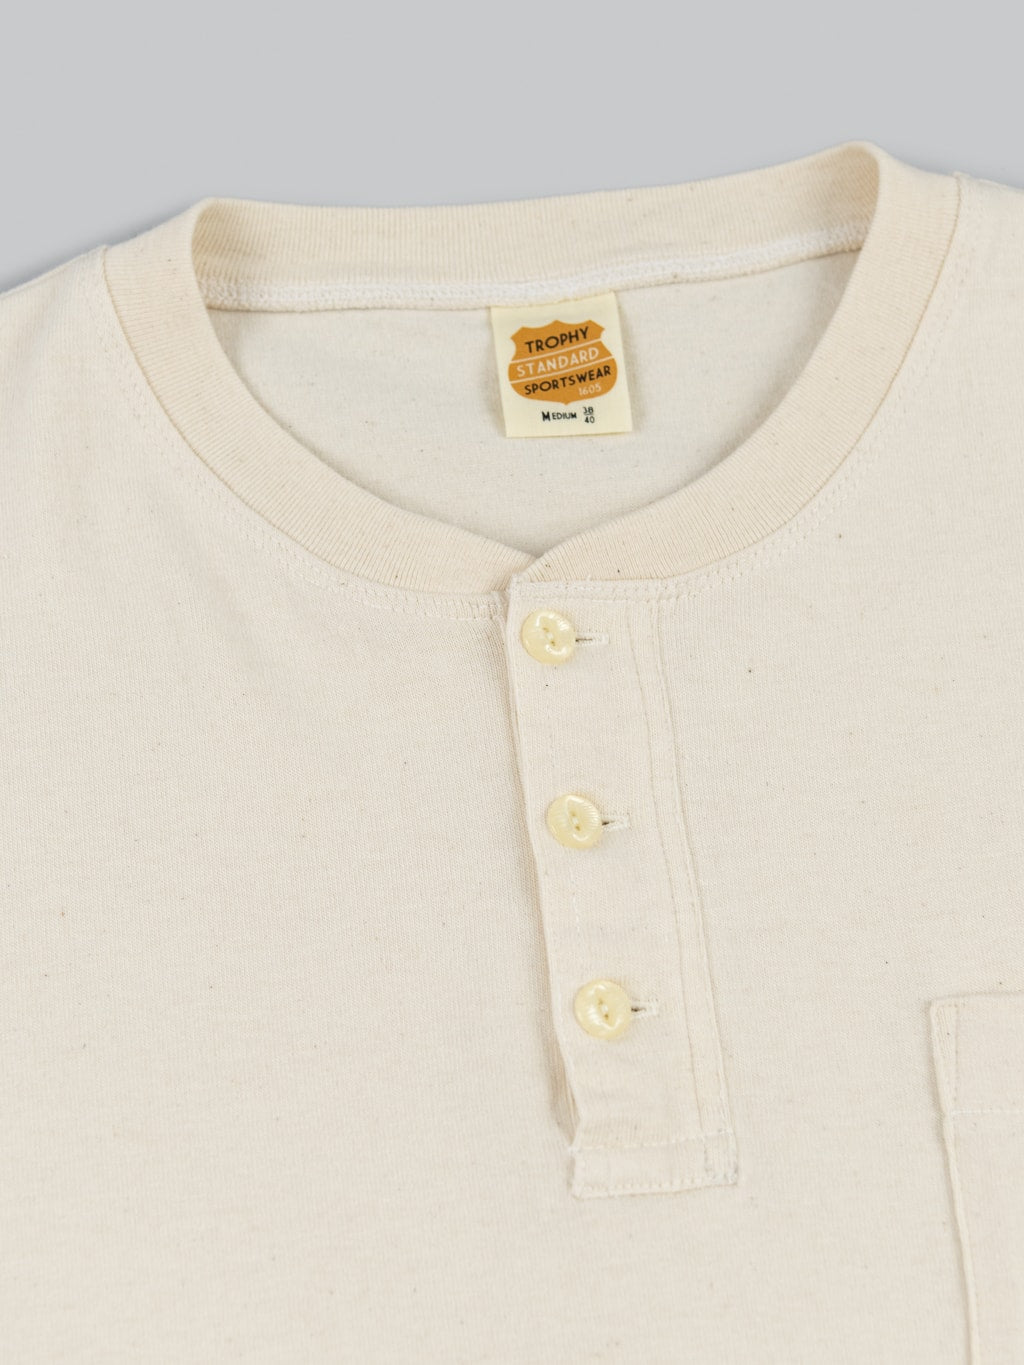 trophy clothing od henley tee natural collar white buttons